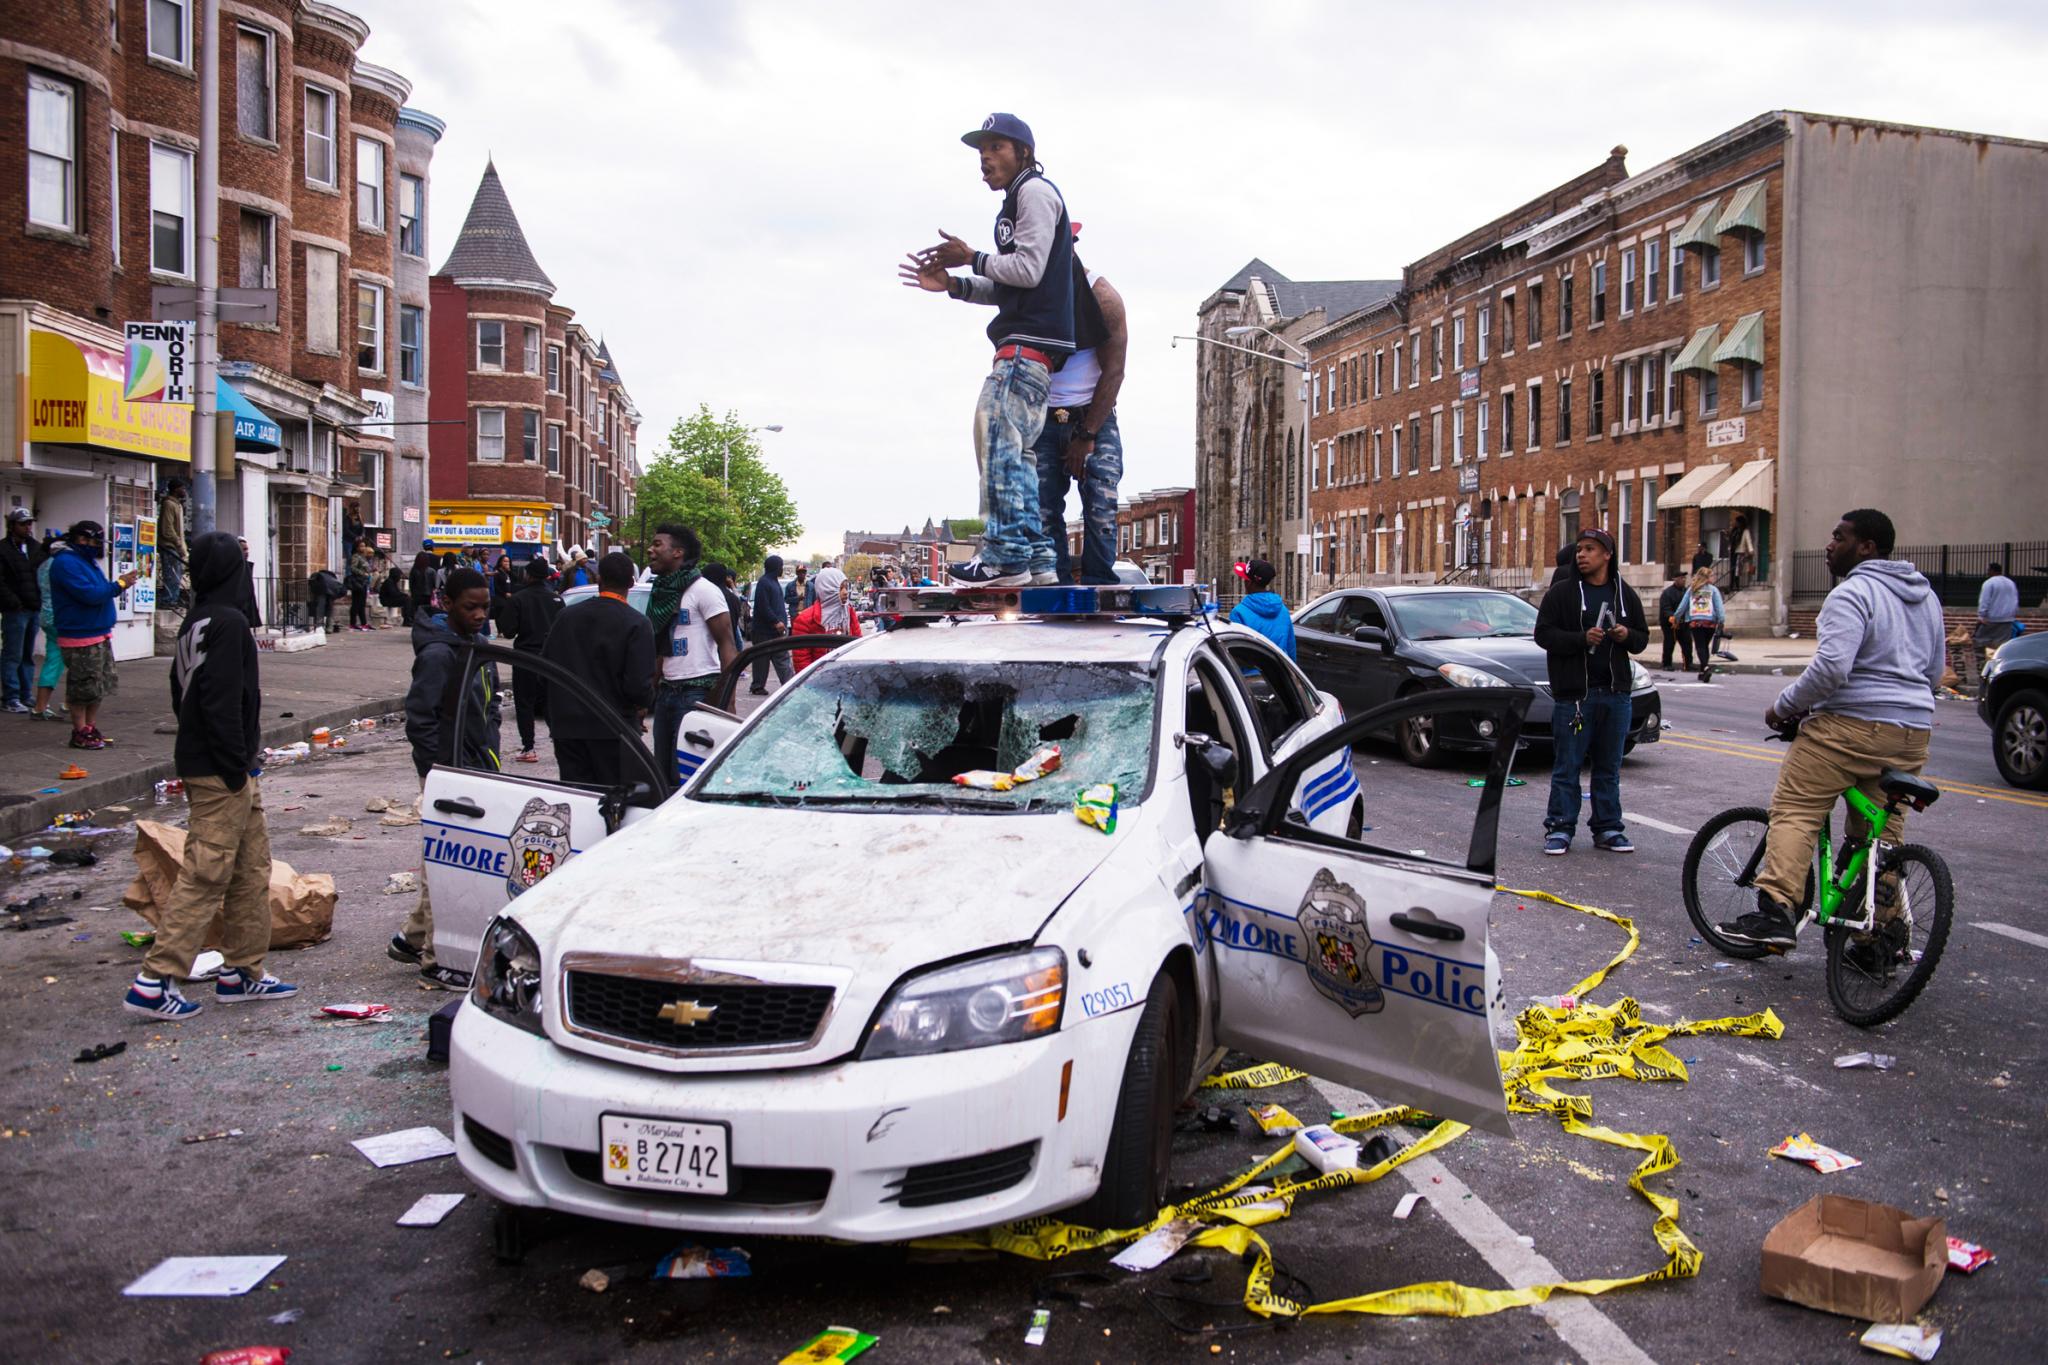 PHOTOS: Baltimore Social Unrest After Freddie Gray's Death